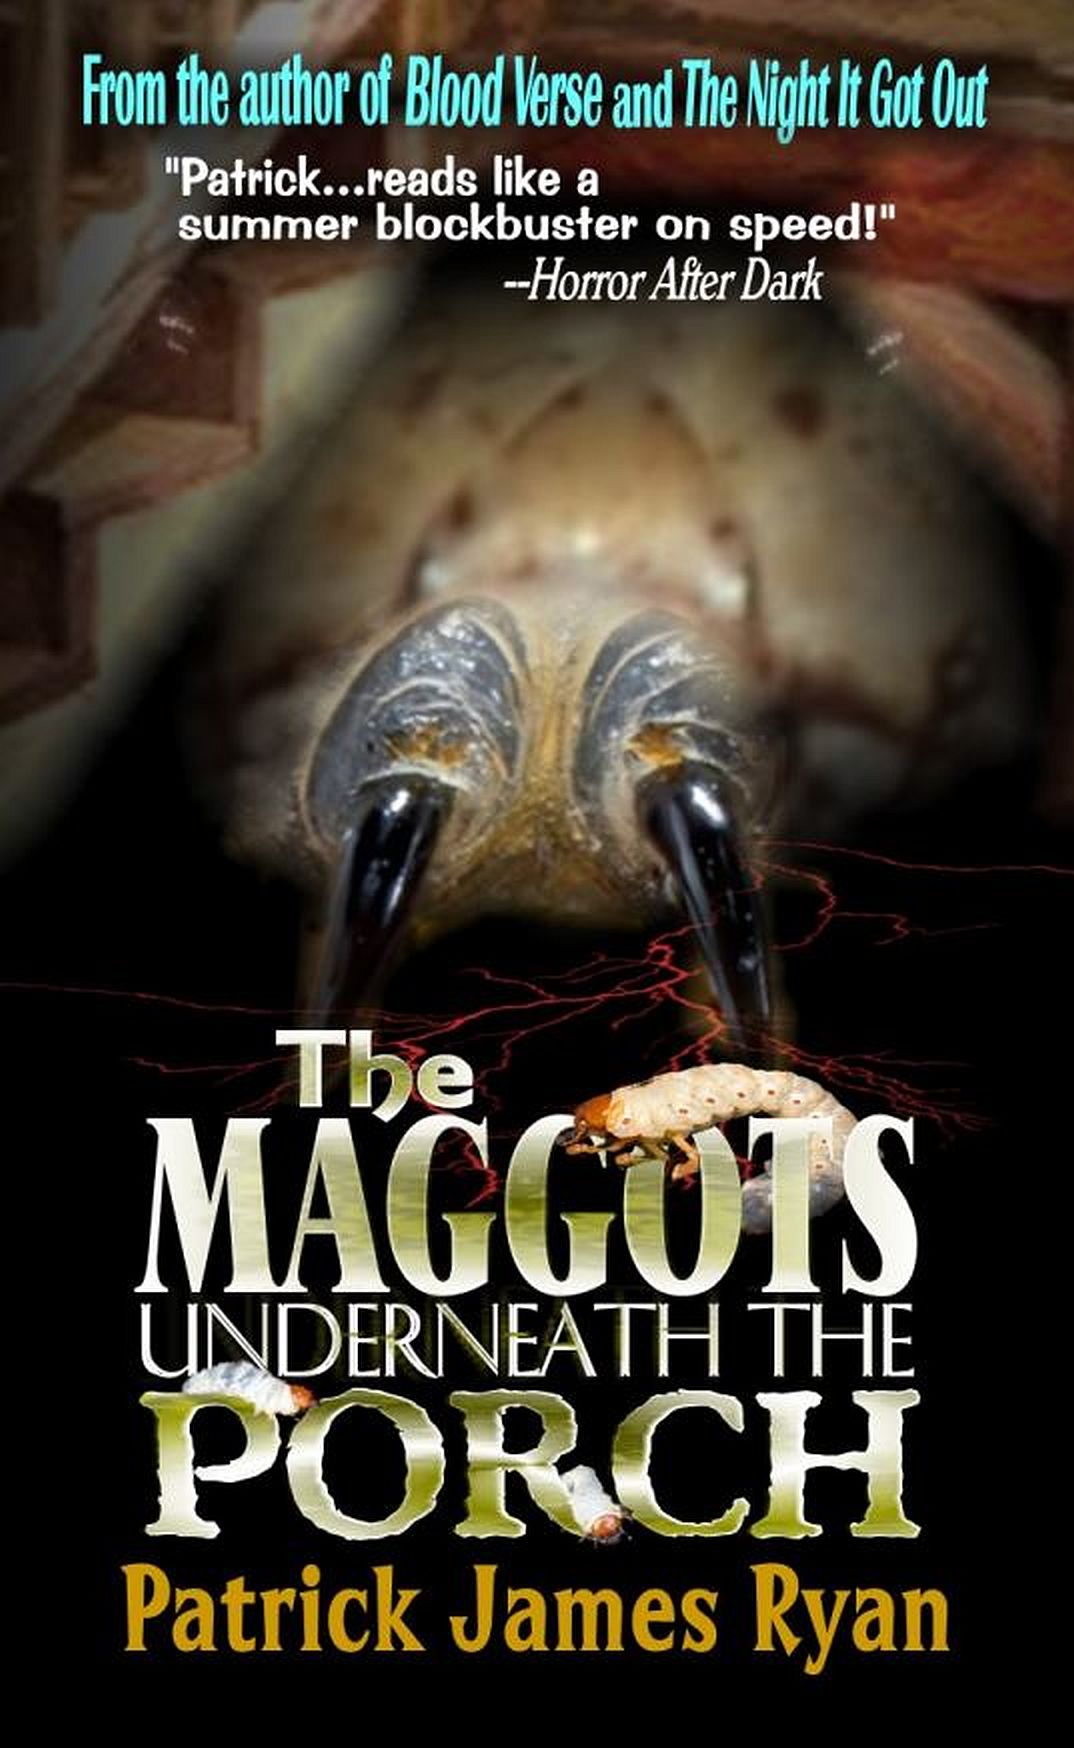 The Maggots Underneath the Porch